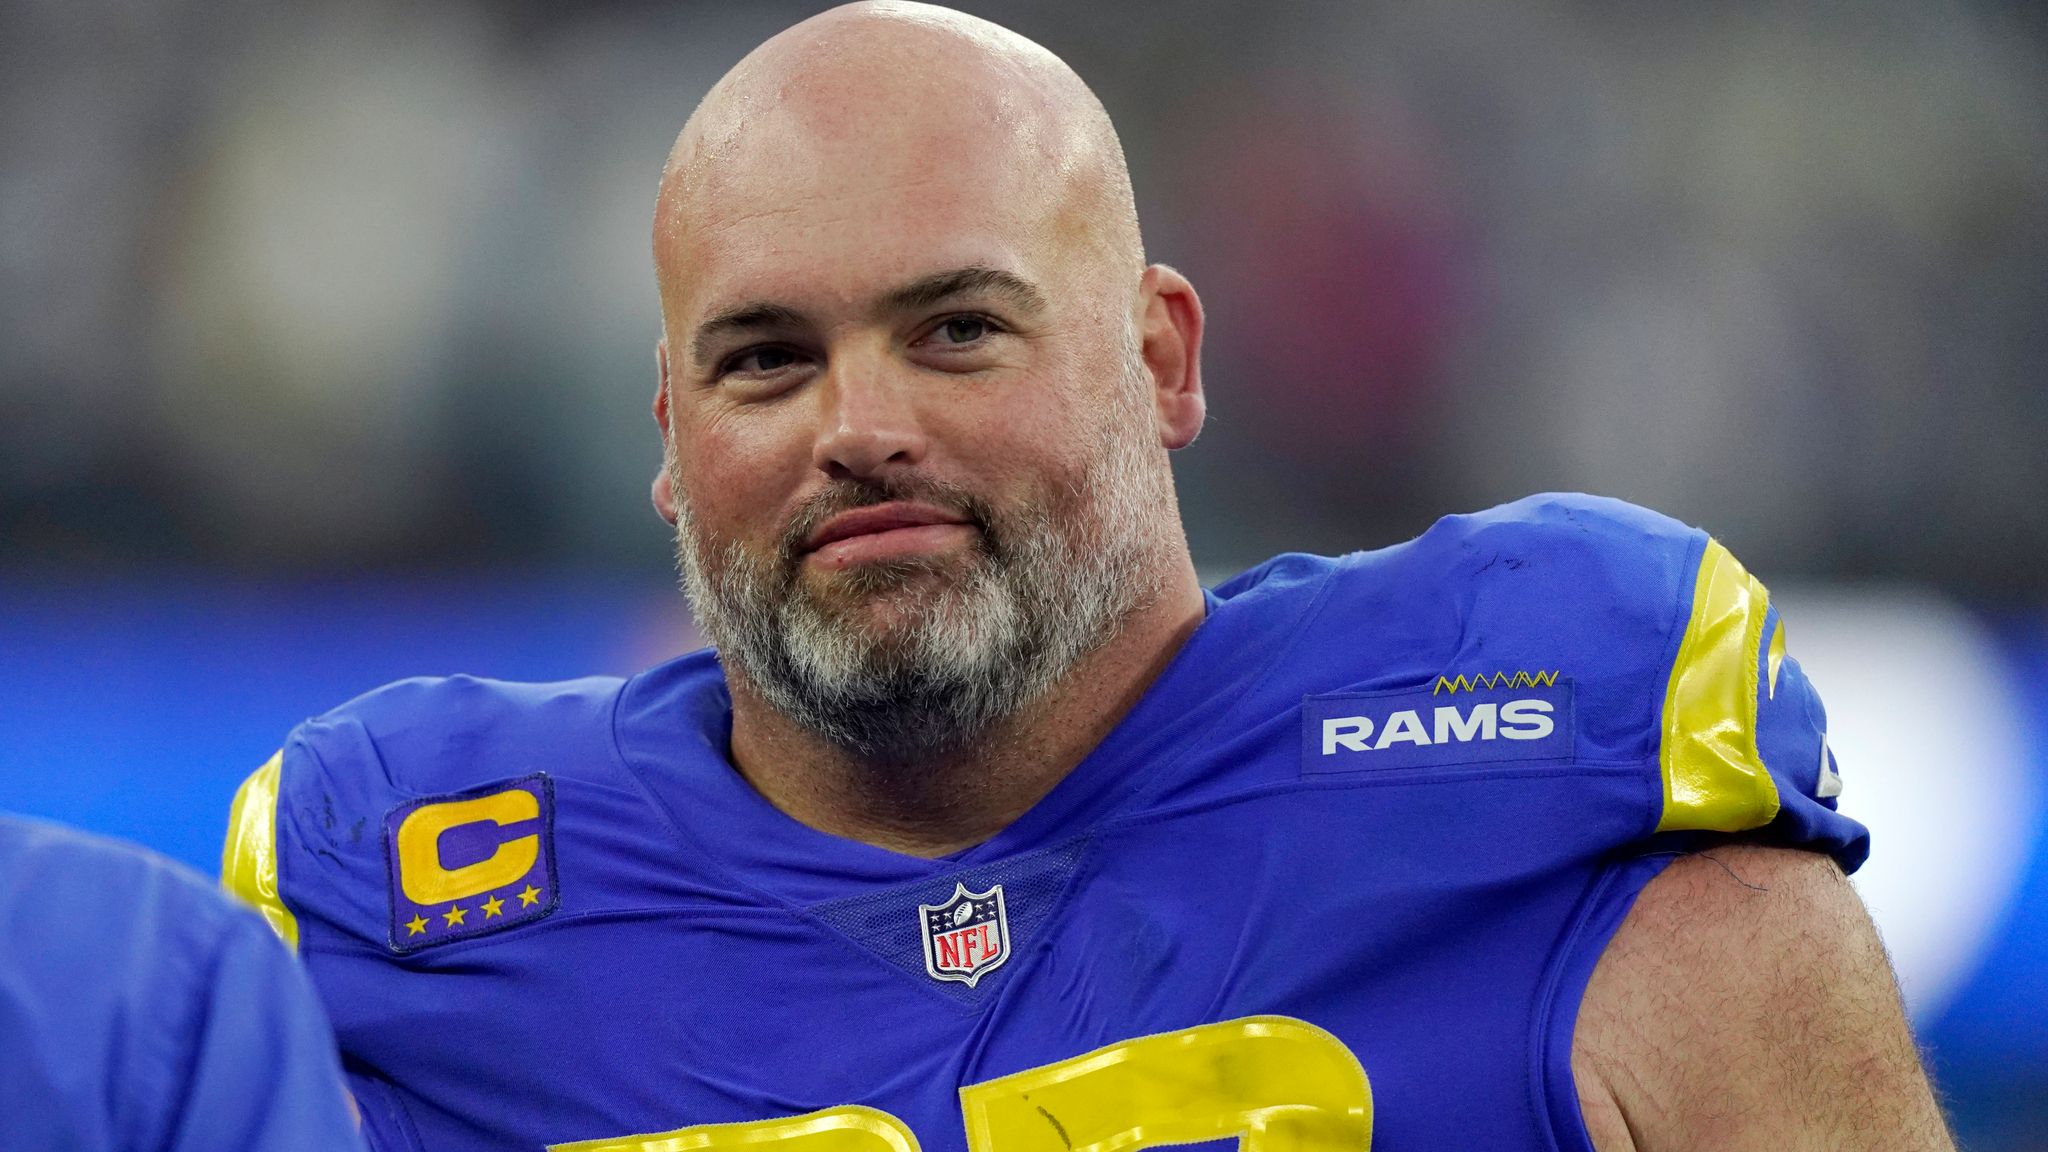 Andrew Whitworth to make NFL history with Los Angeles Rams at 40 years old, NFL News